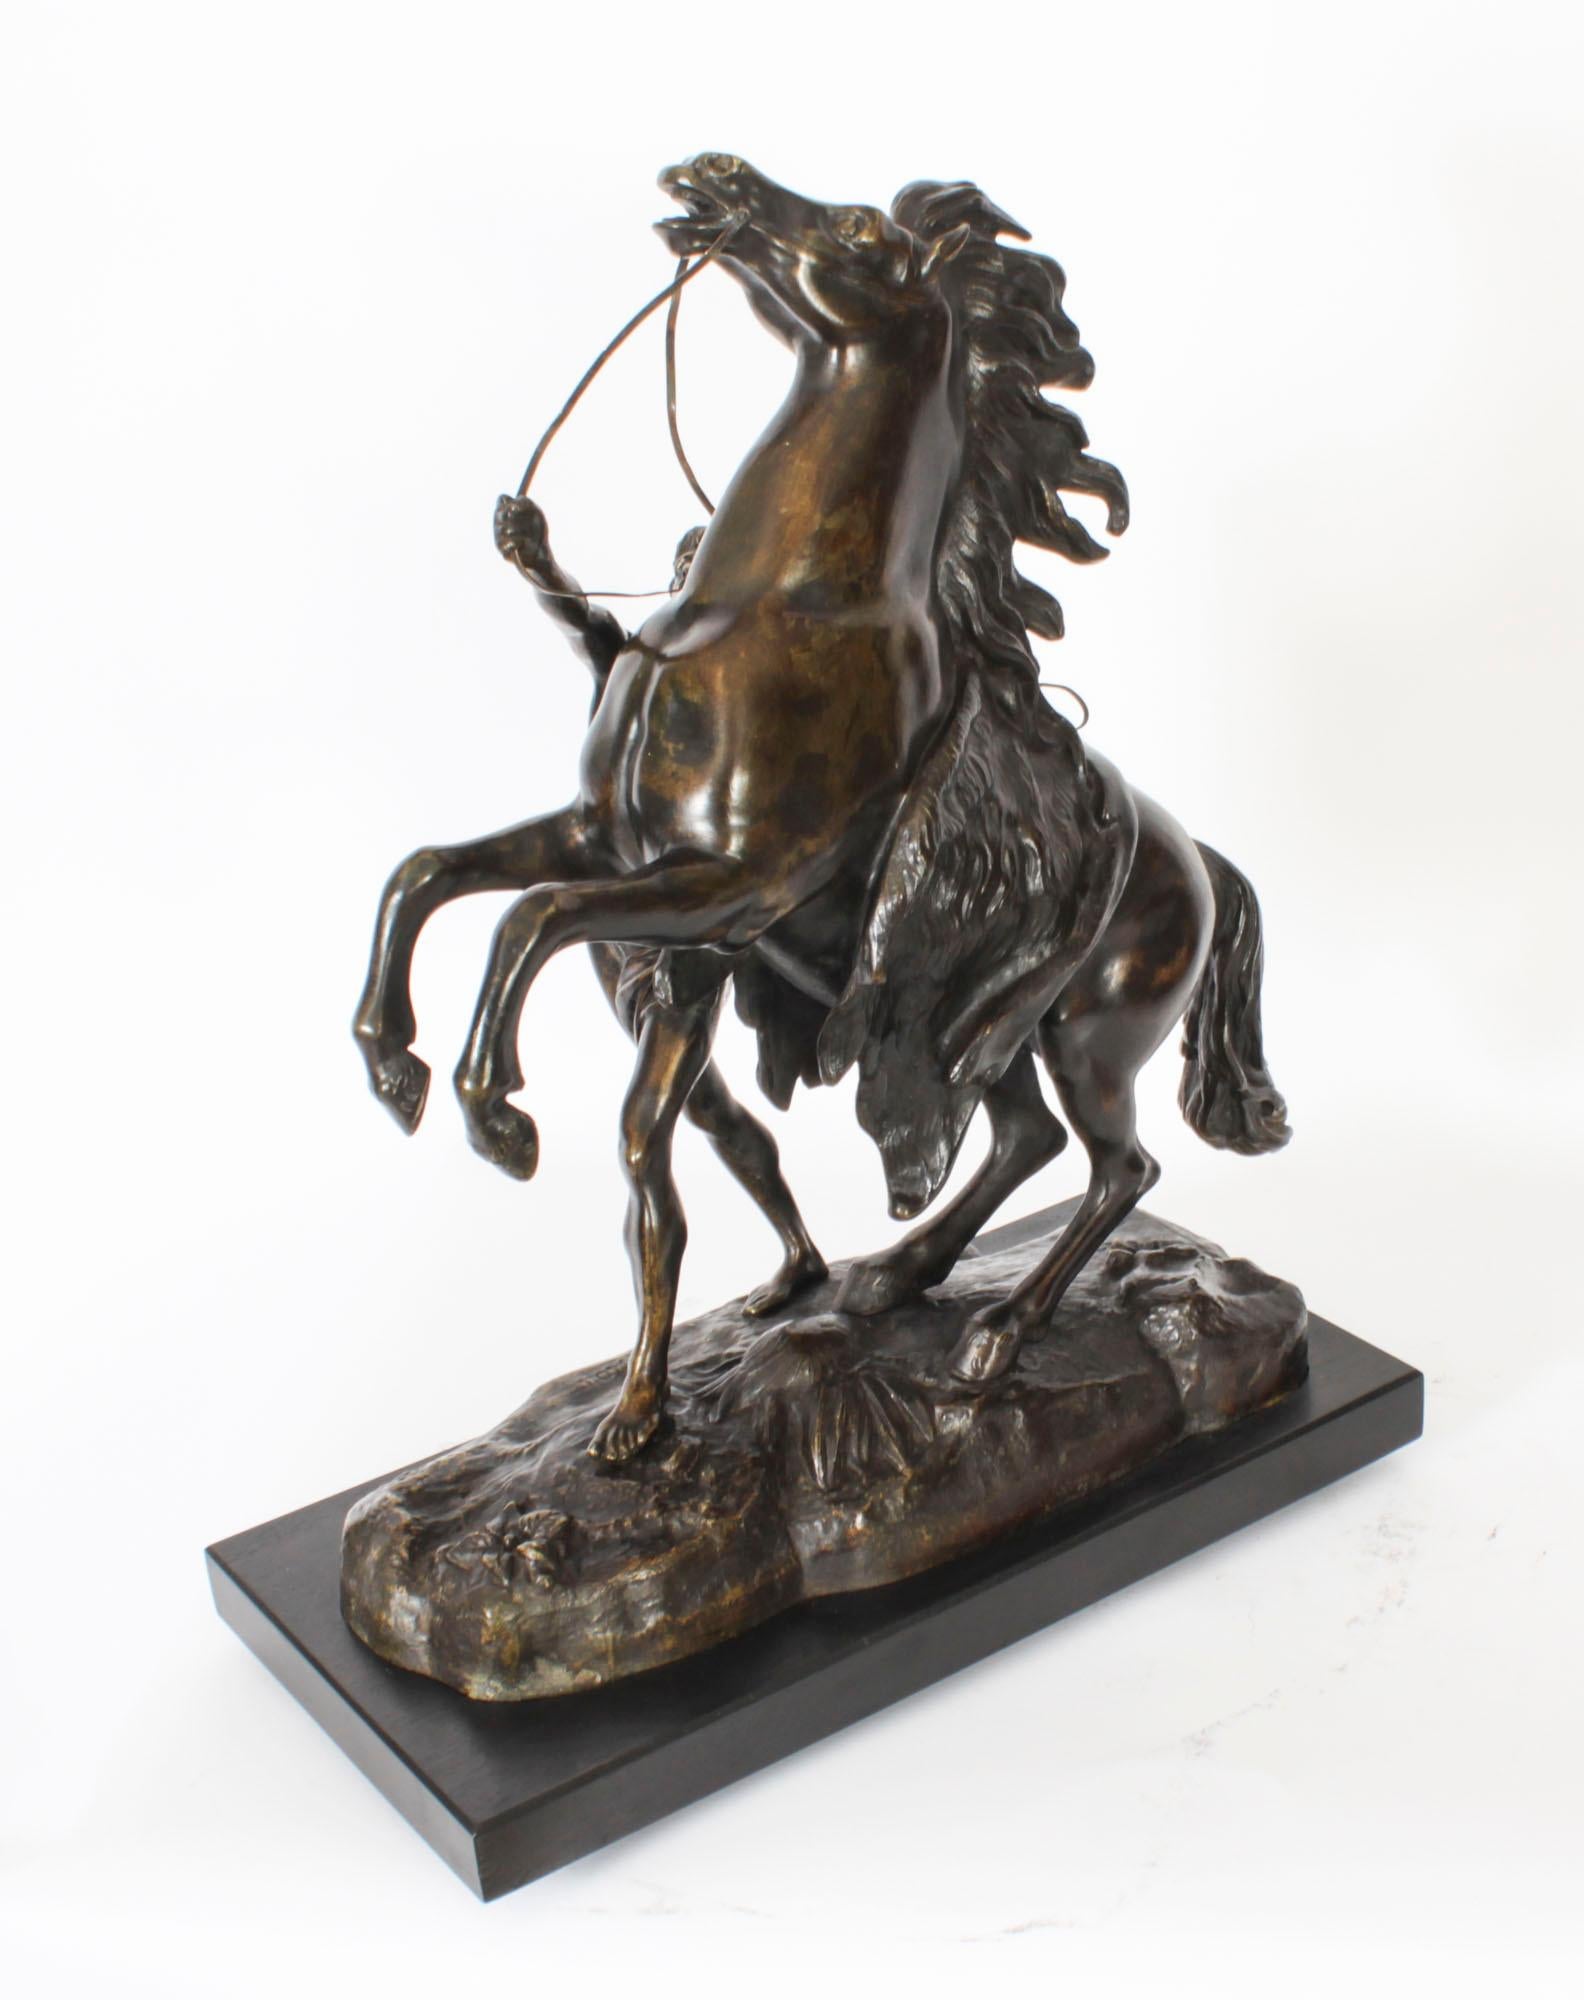 Antique Pair of French Bronze Marly Horses Sculptures by Cousteau 19th Century For Sale 3